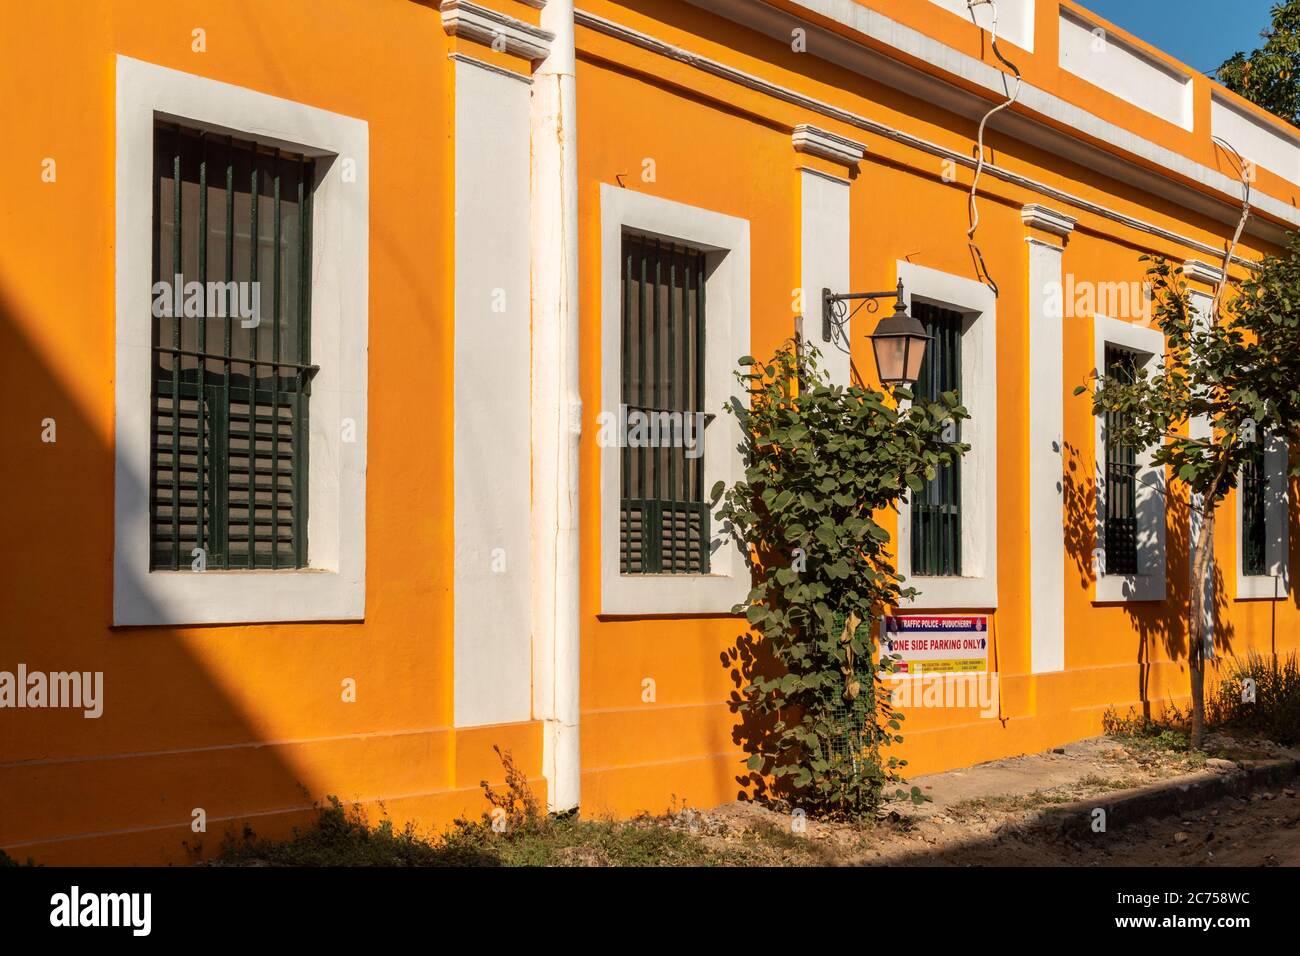 Pondicherry. India - February 2020: Old French era houses painted in bright yellow orange colors on a quiet street in the old town. Stock Photo